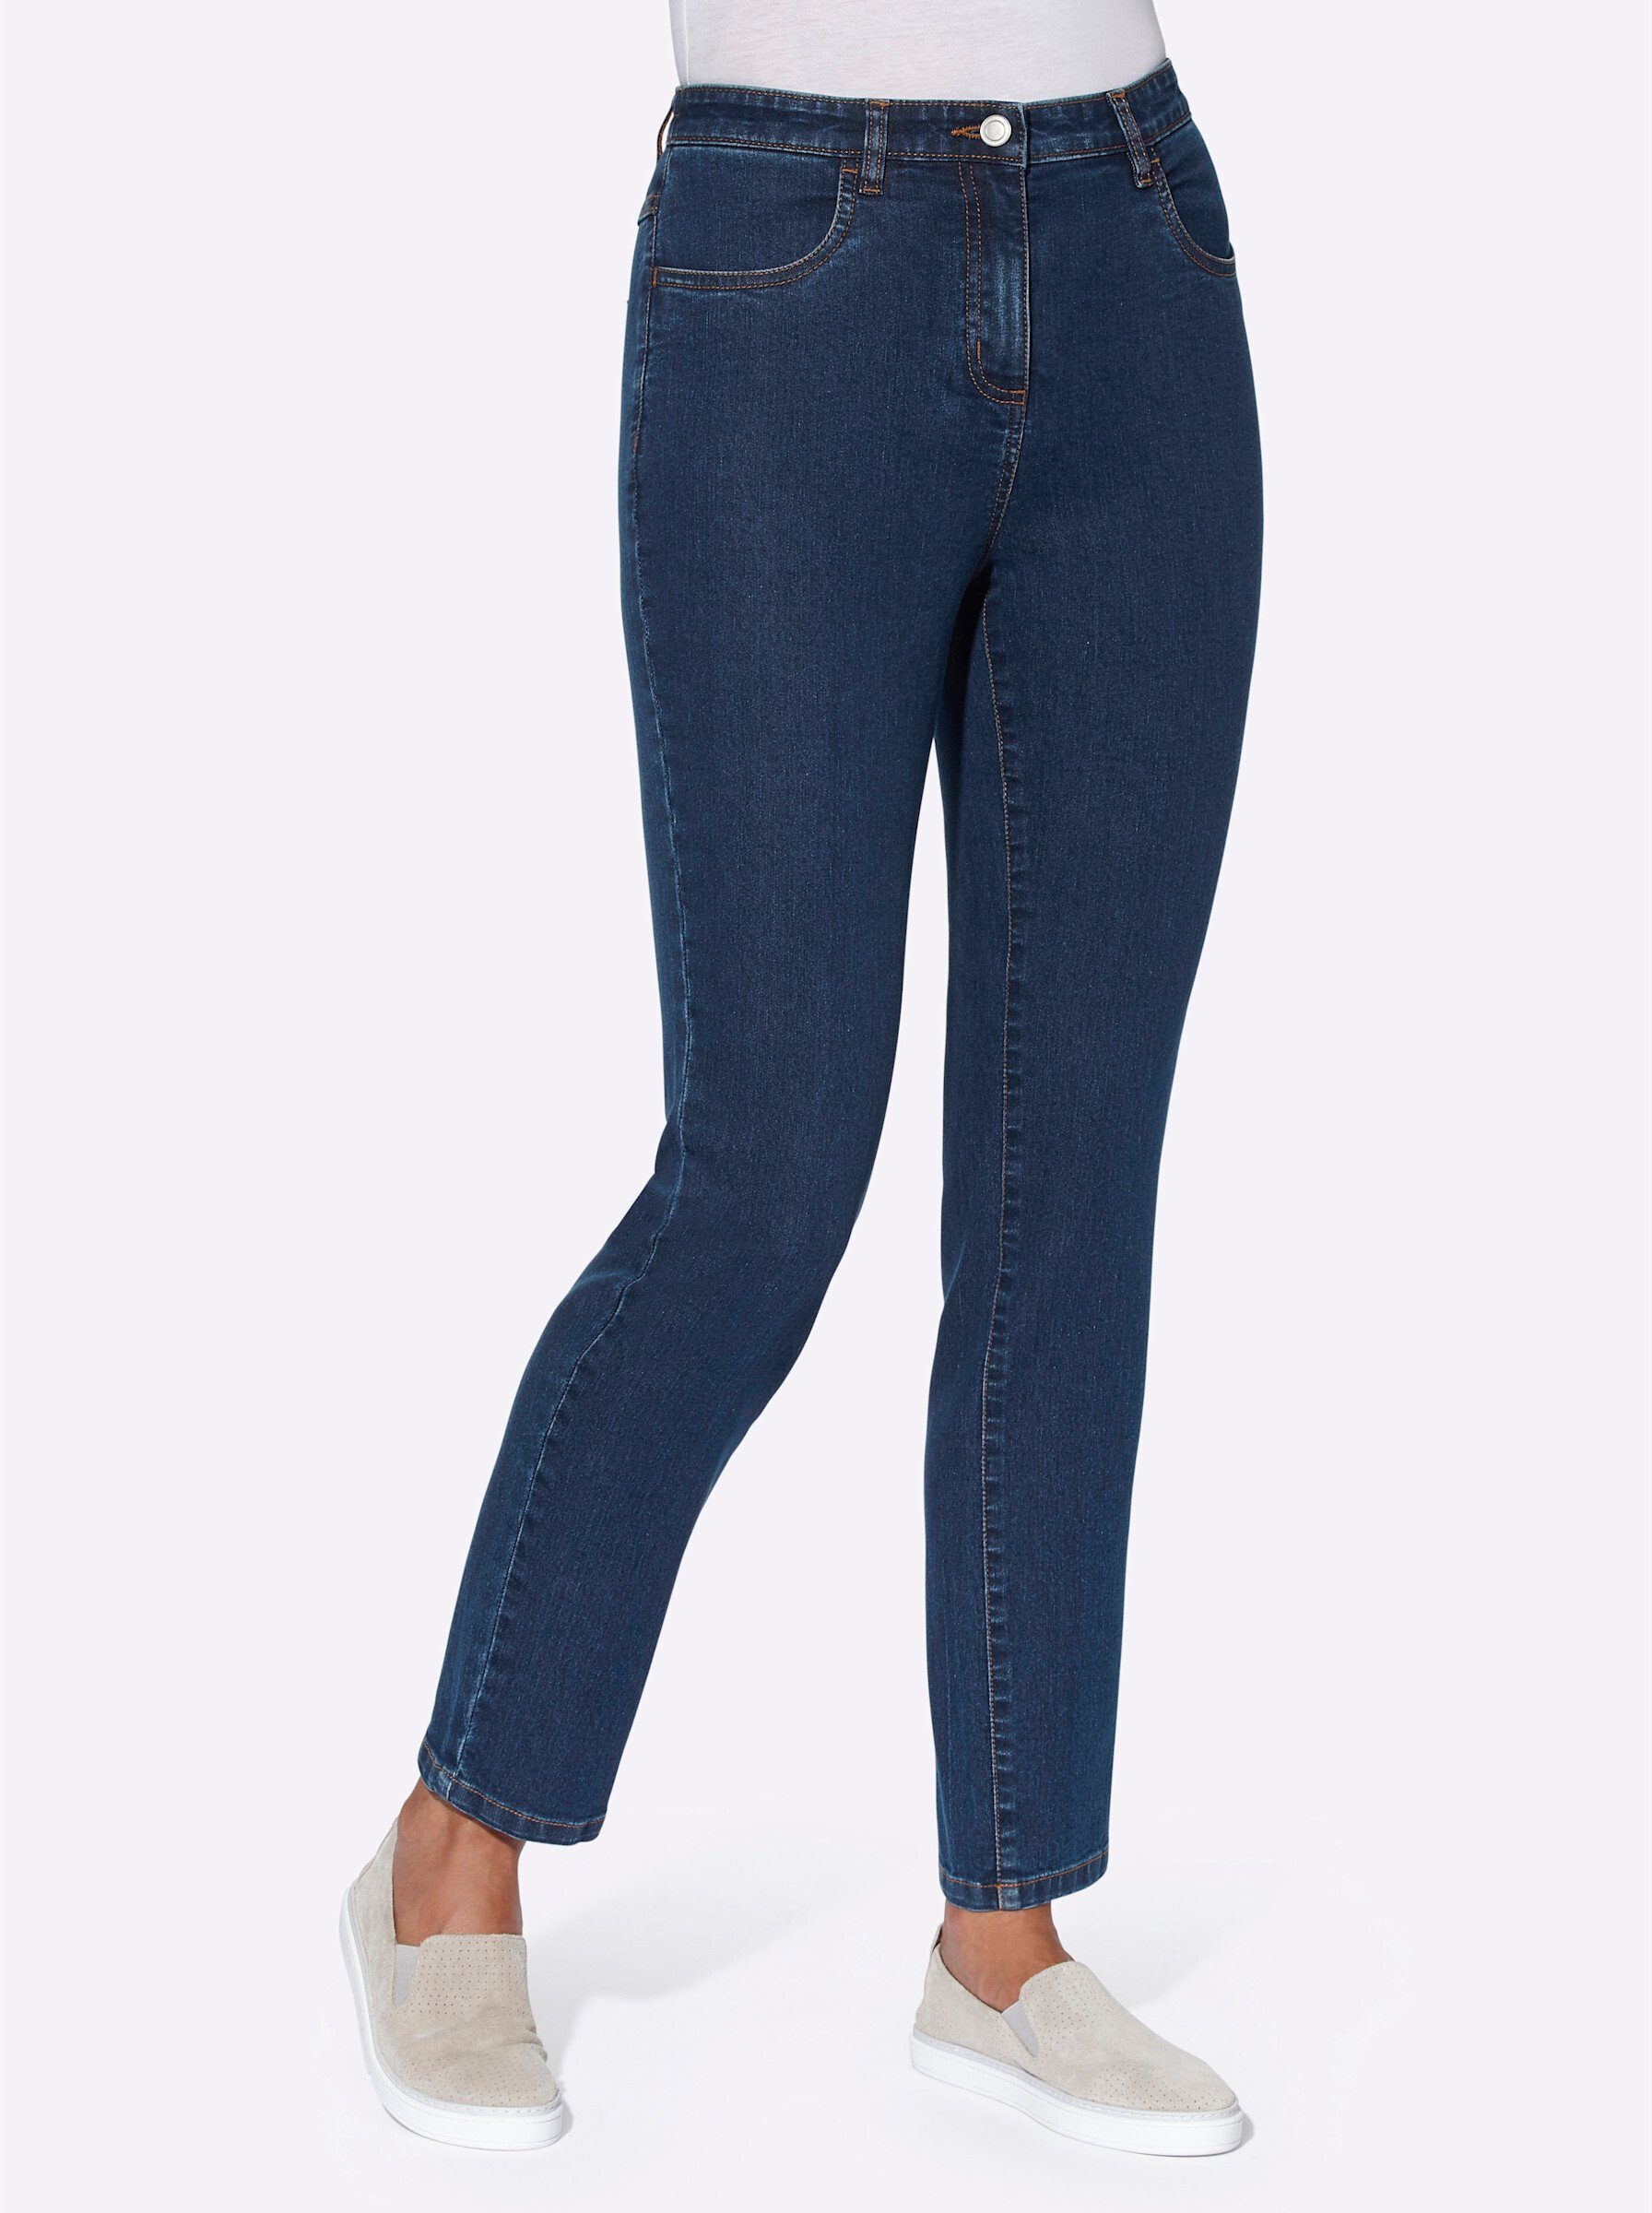 Sieh Jeans blue-stone-washed Bequeme an!